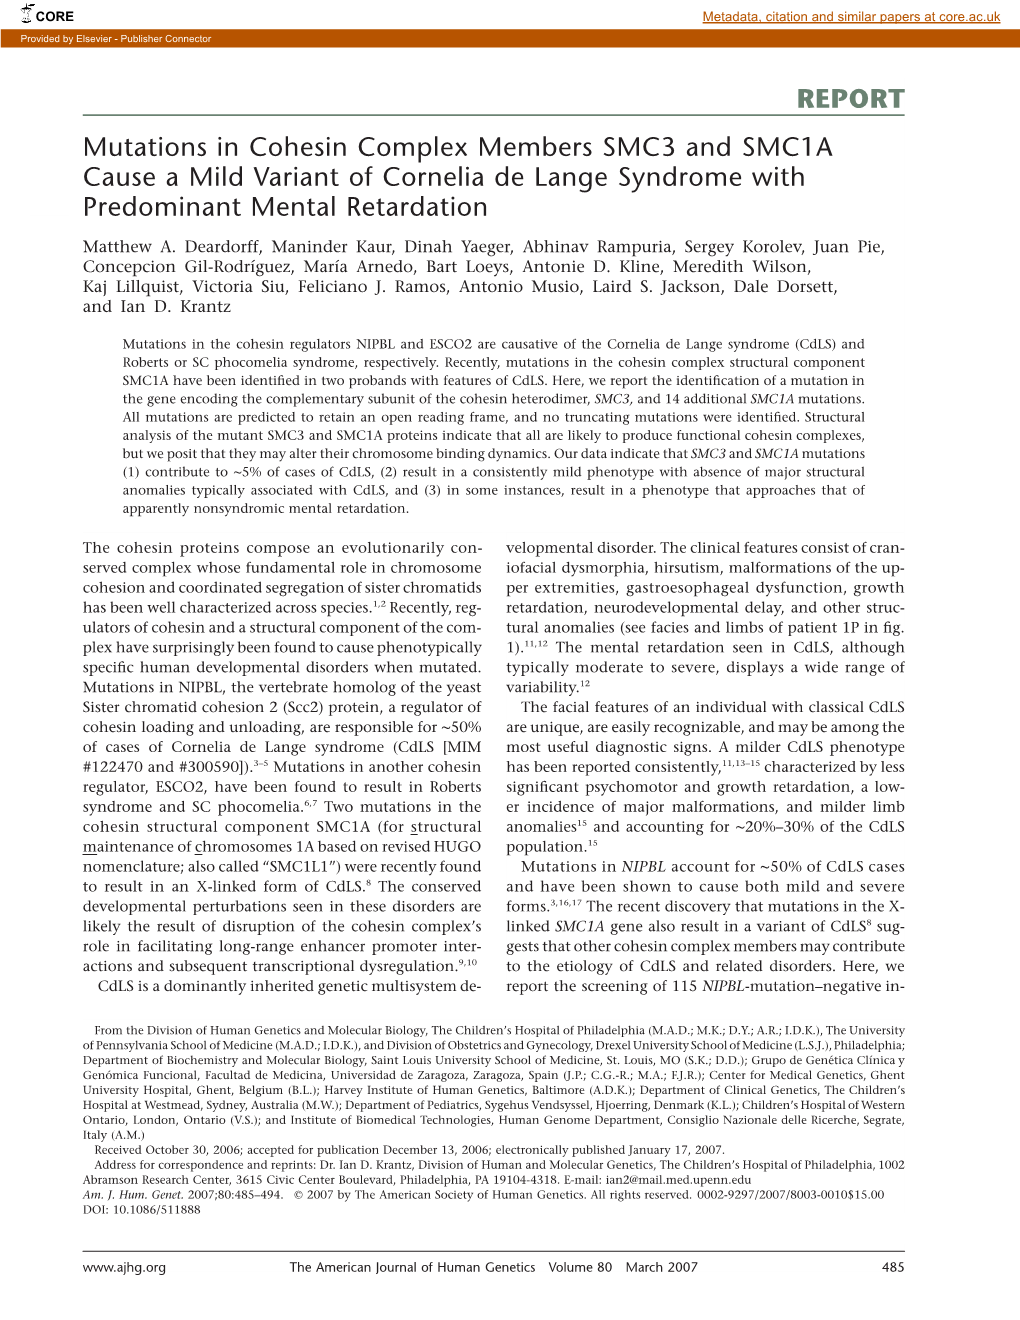 REPORT Mutations in Cohesin Complex Members SMC3 and SMC1A Cause a Mild Variant of Cornelia De Lange Syndrome with Predominant Mental Retardation